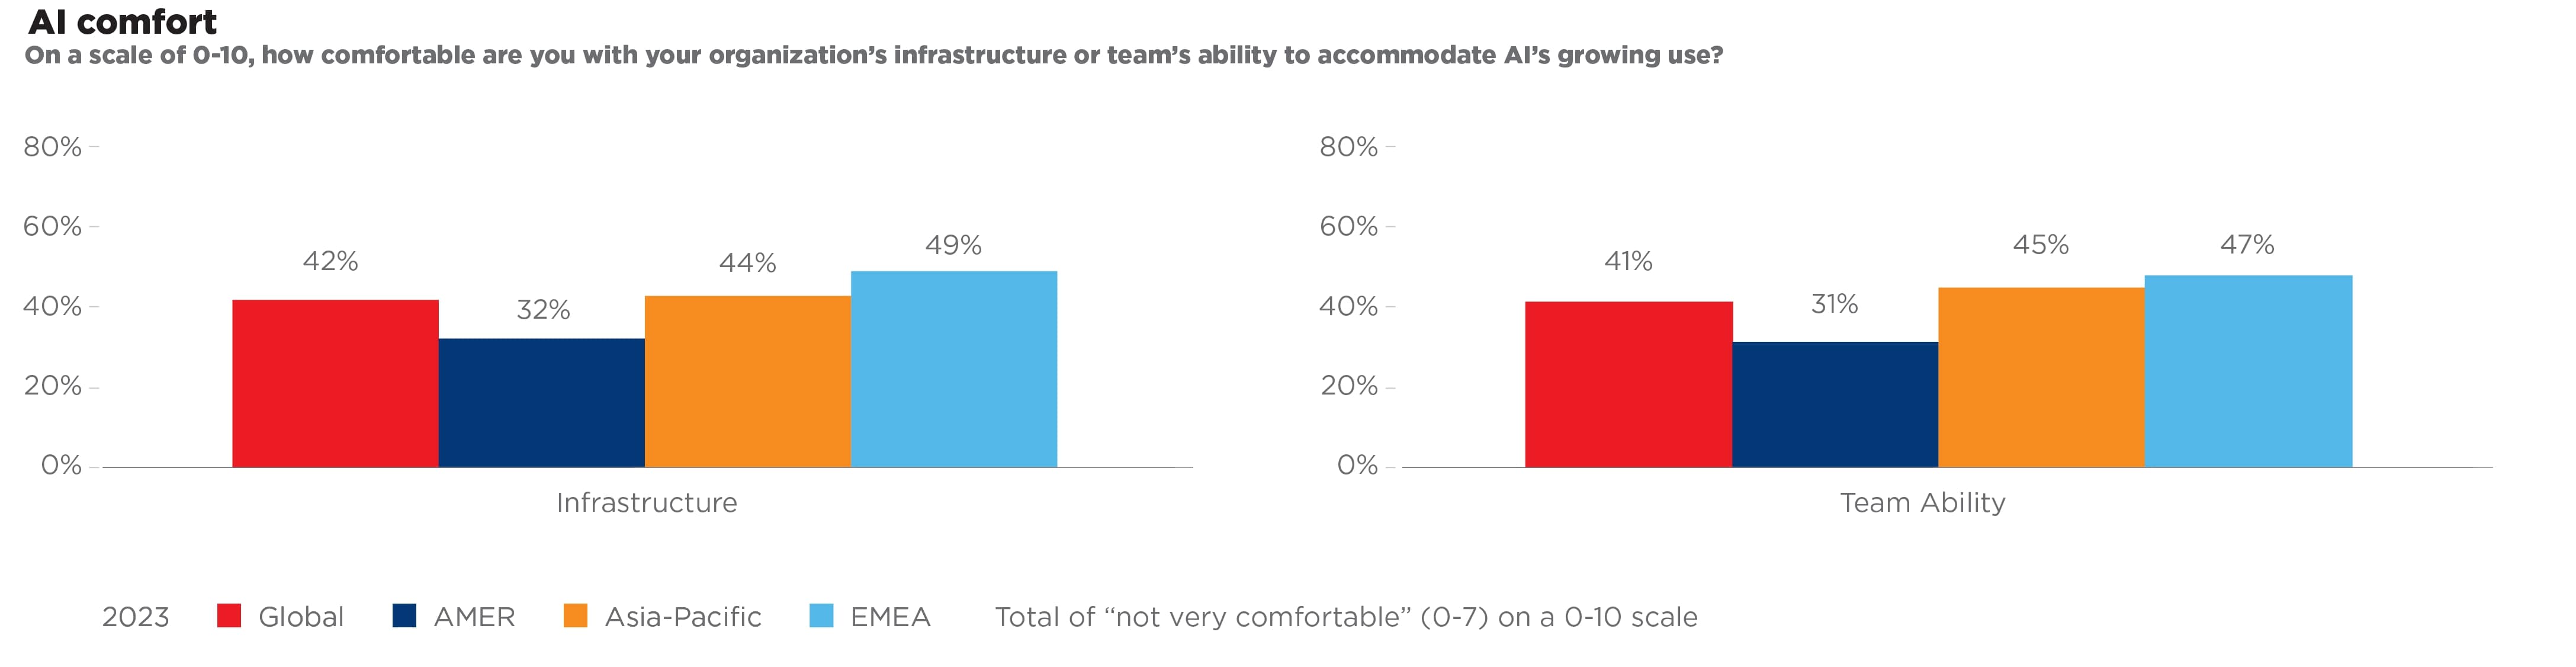 On a scale of 0-10, how comfortable are you with your organization’s infrastructure or team’s ability to accommodate AI’s growing use?